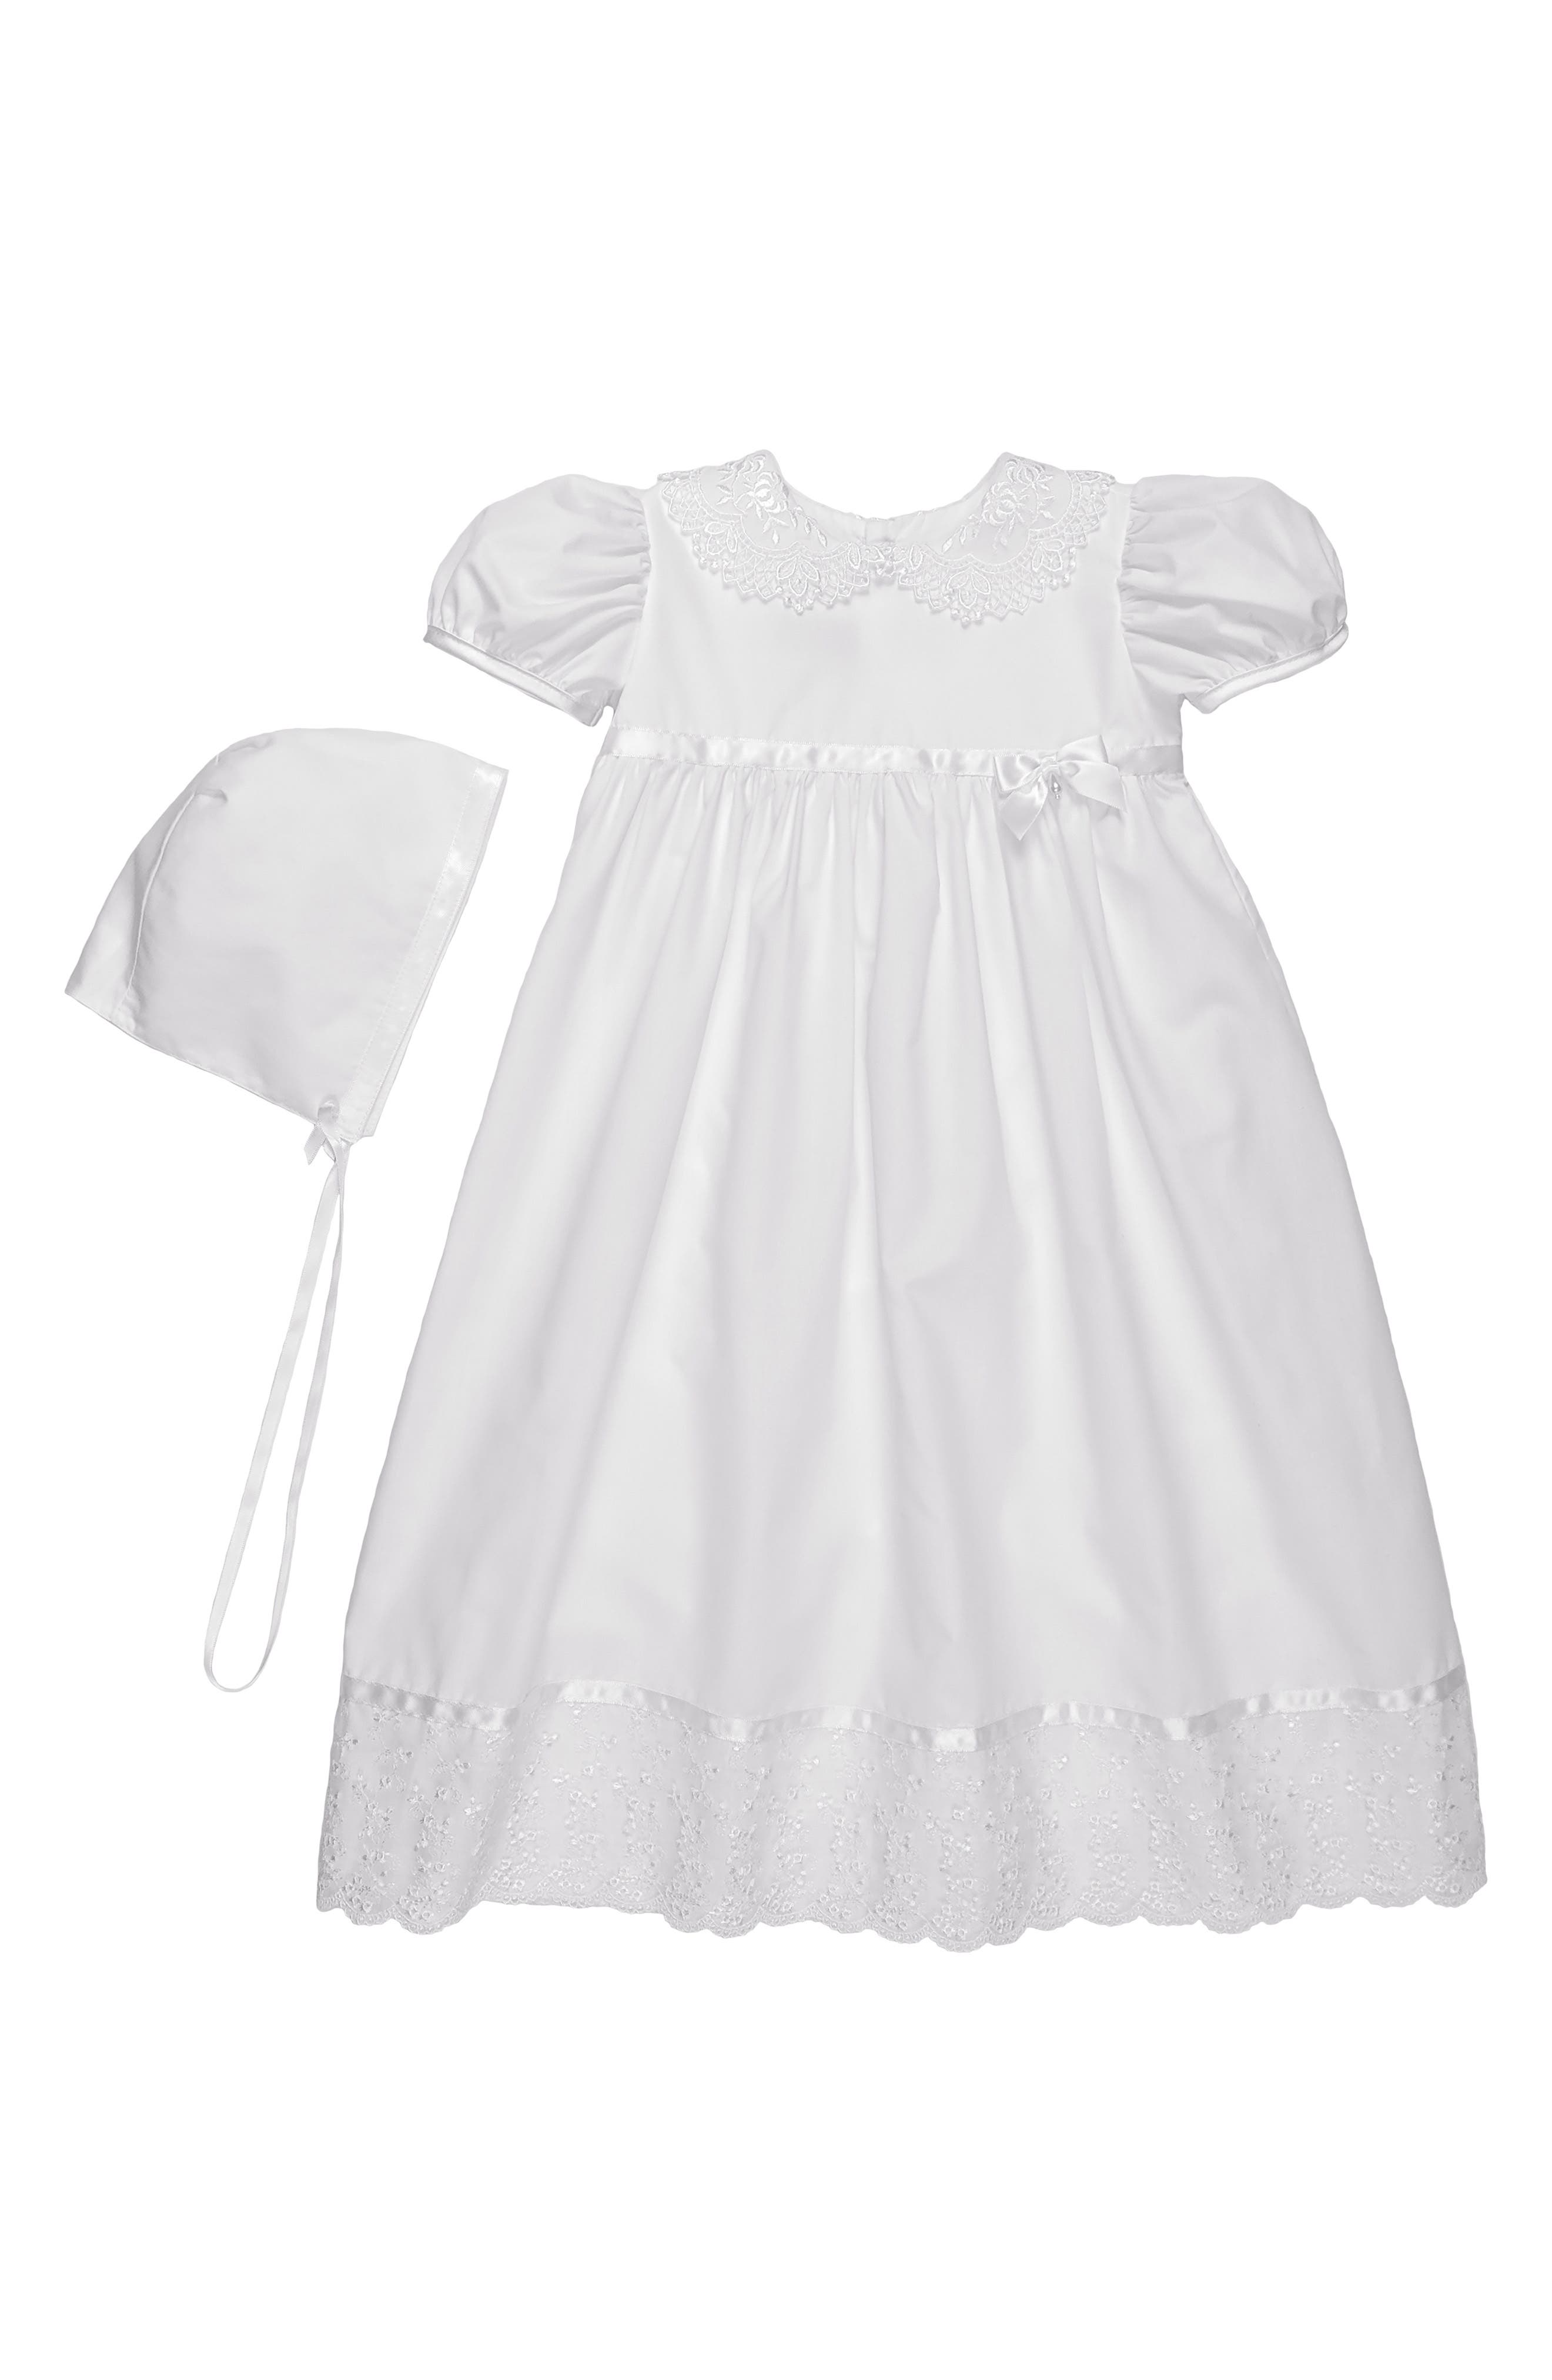 18 month christening outfit